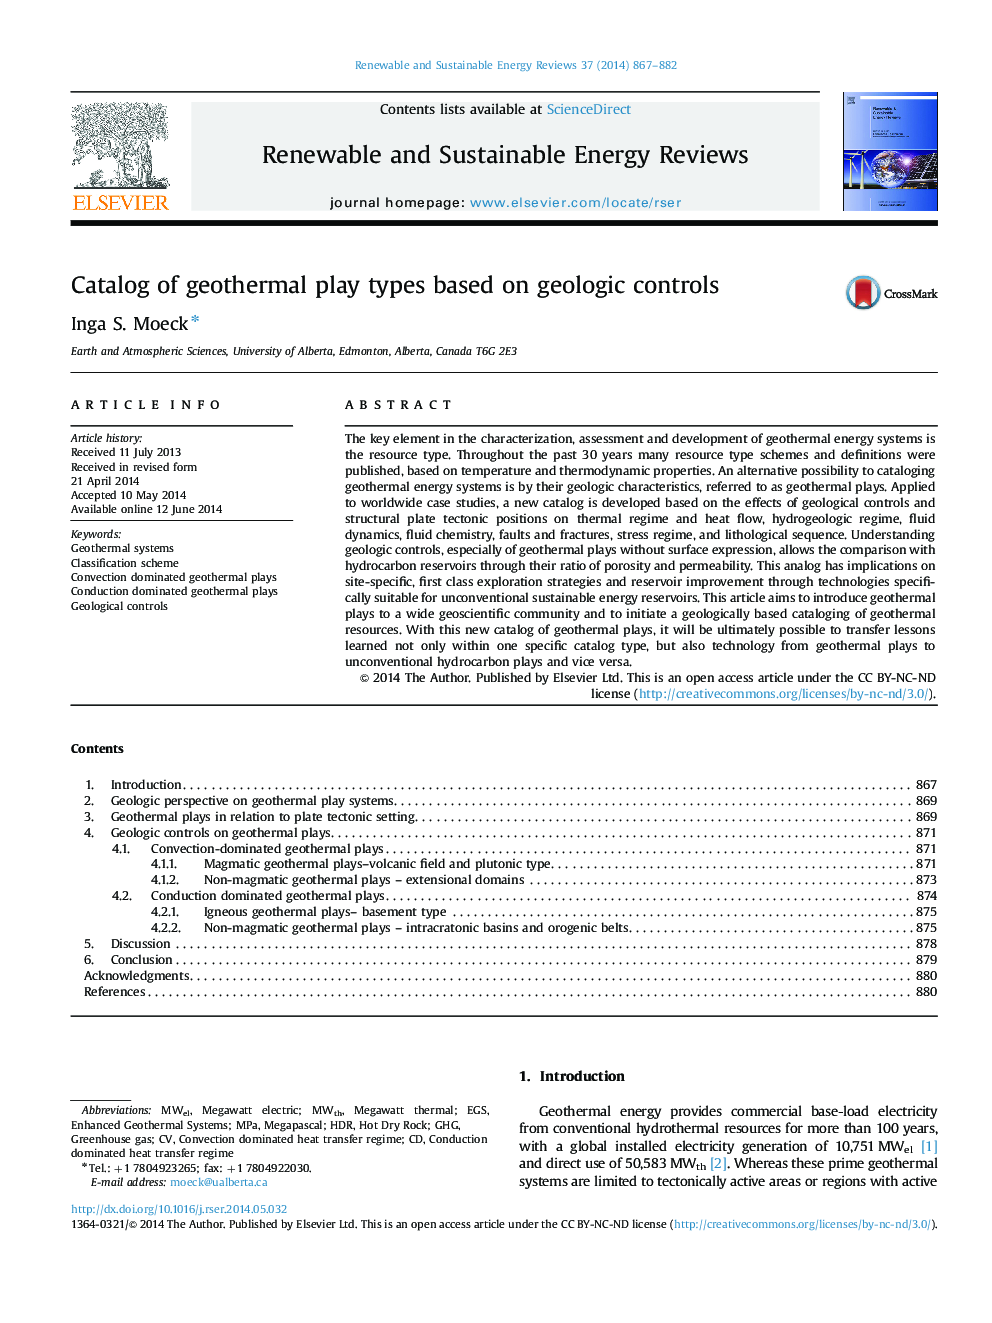 Catalog of geothermal play types based on geologic controls